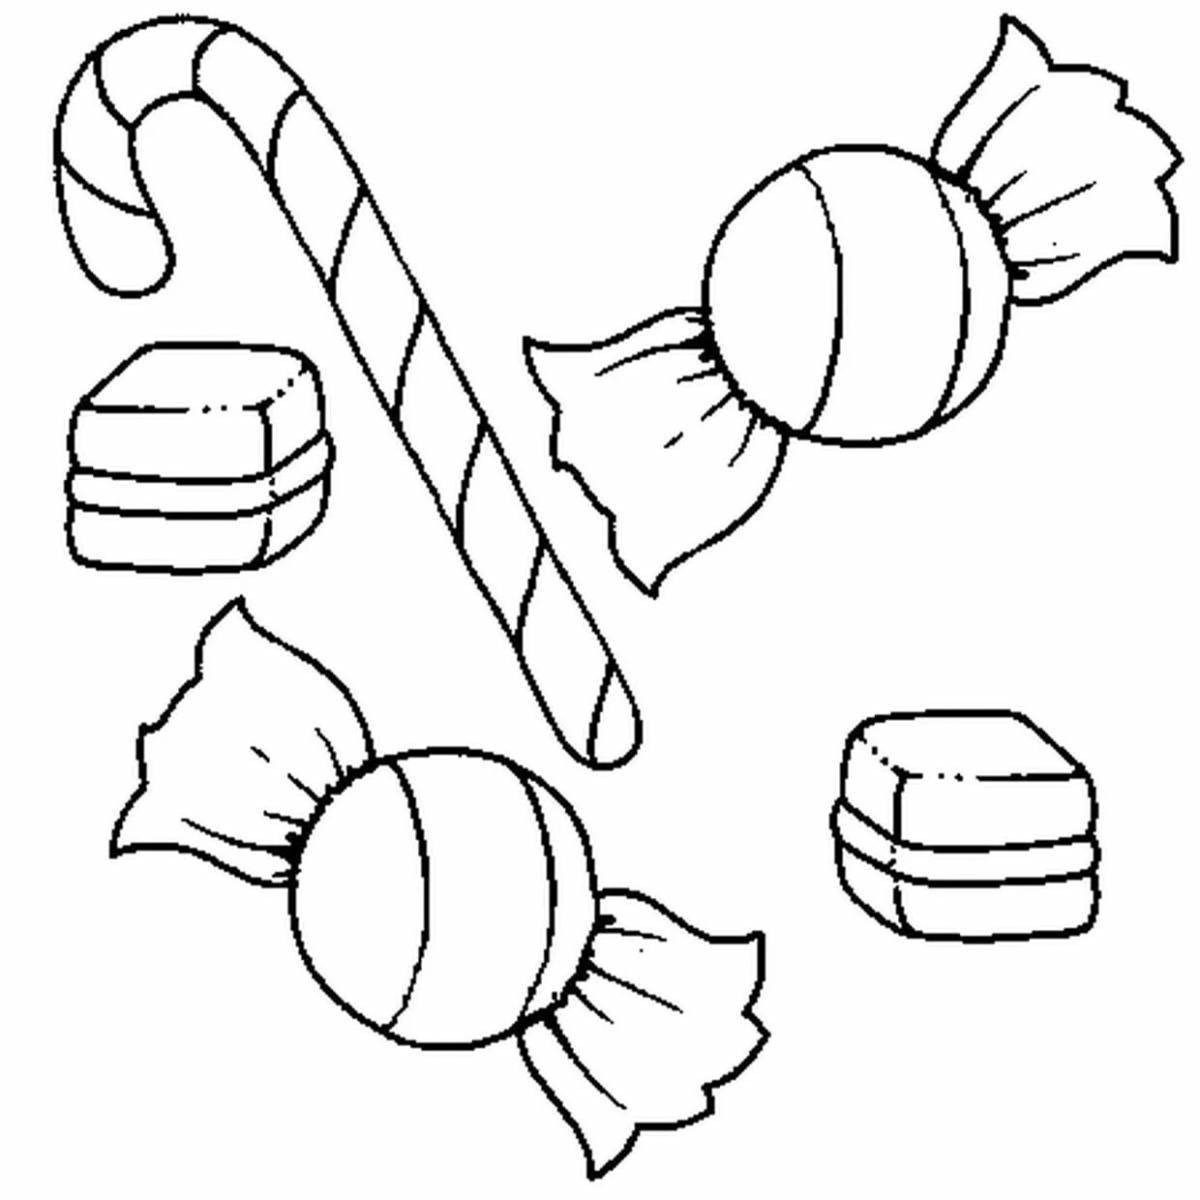 Coloring pages cute sweets for children 6-7 years old